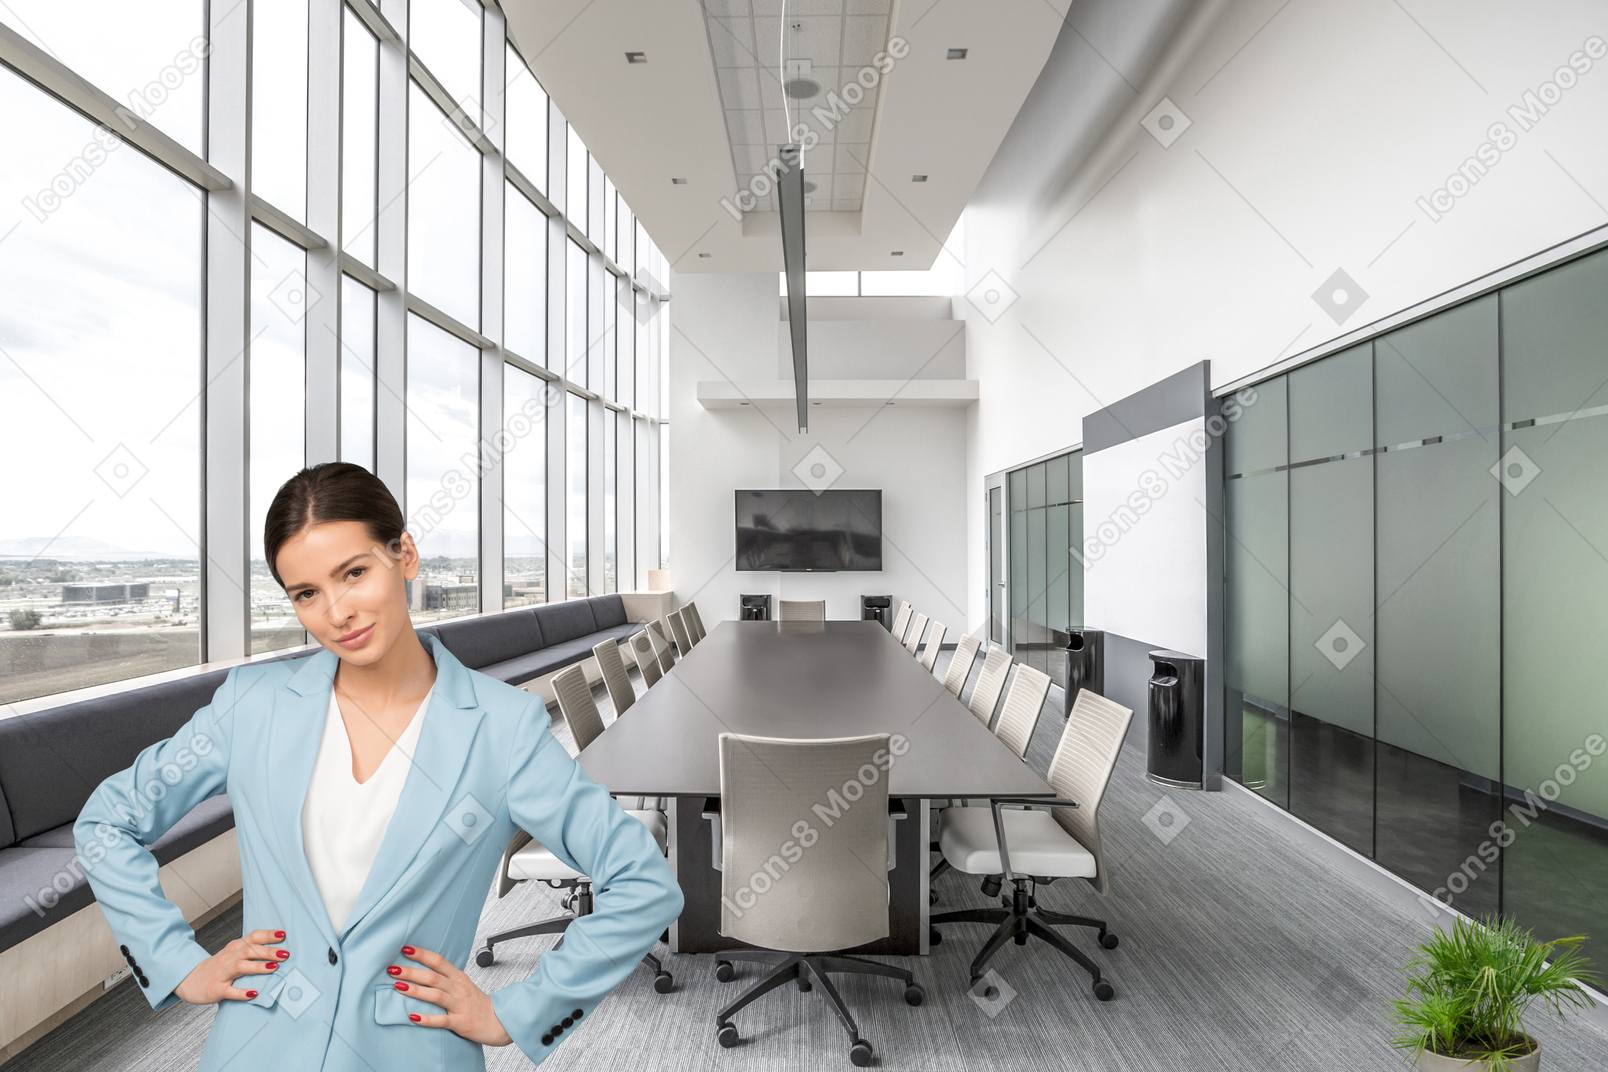 A woman standing in front of a conference room